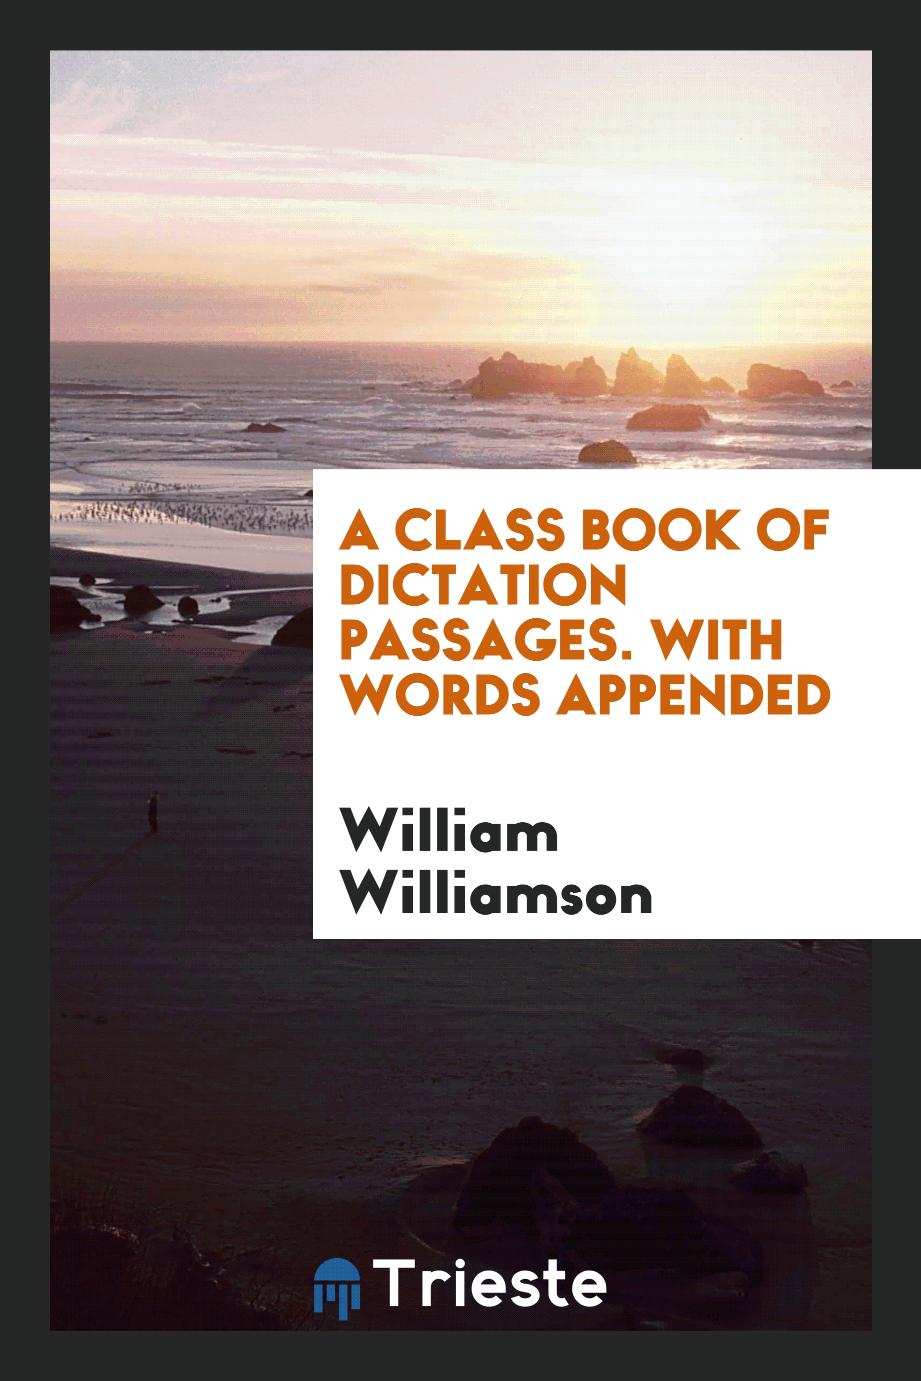 A Class Book of Dictation Passages. With Words Appended